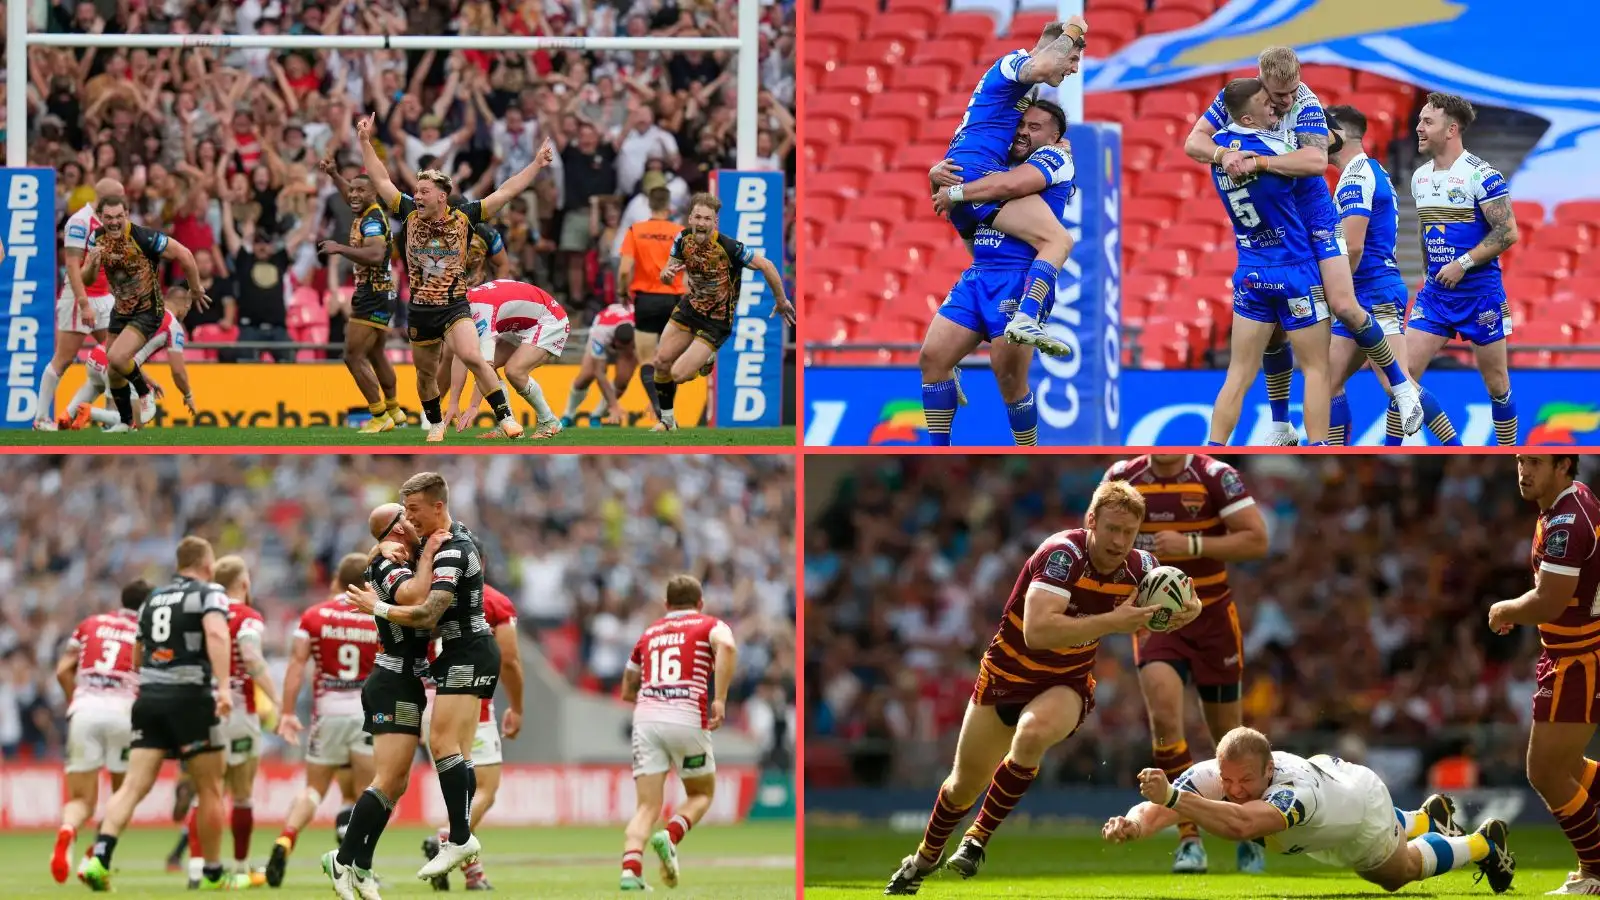 Leigh Leopards, Leeds Rhinos, Hull FC, Huddersfield Giants at Wembley